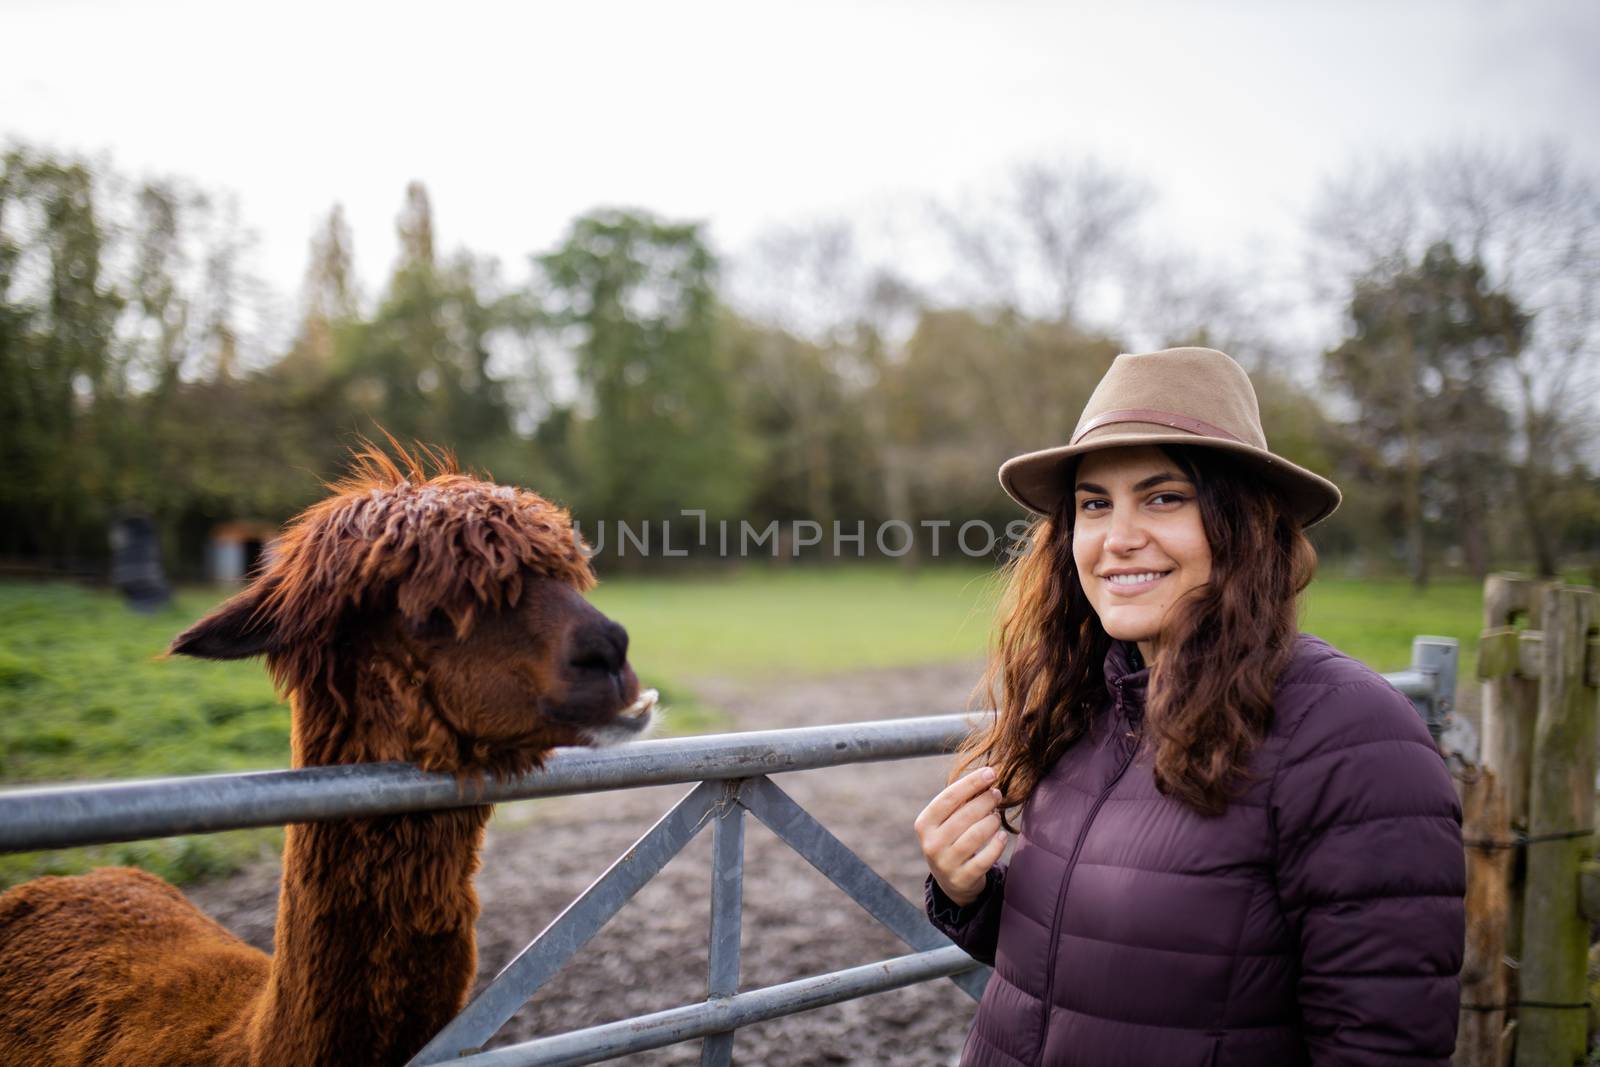 Smiling brunette woman wearing a hat and standing next to a brown alpaca while looking at the camera, and with a blurry forest and cloudy sky as background